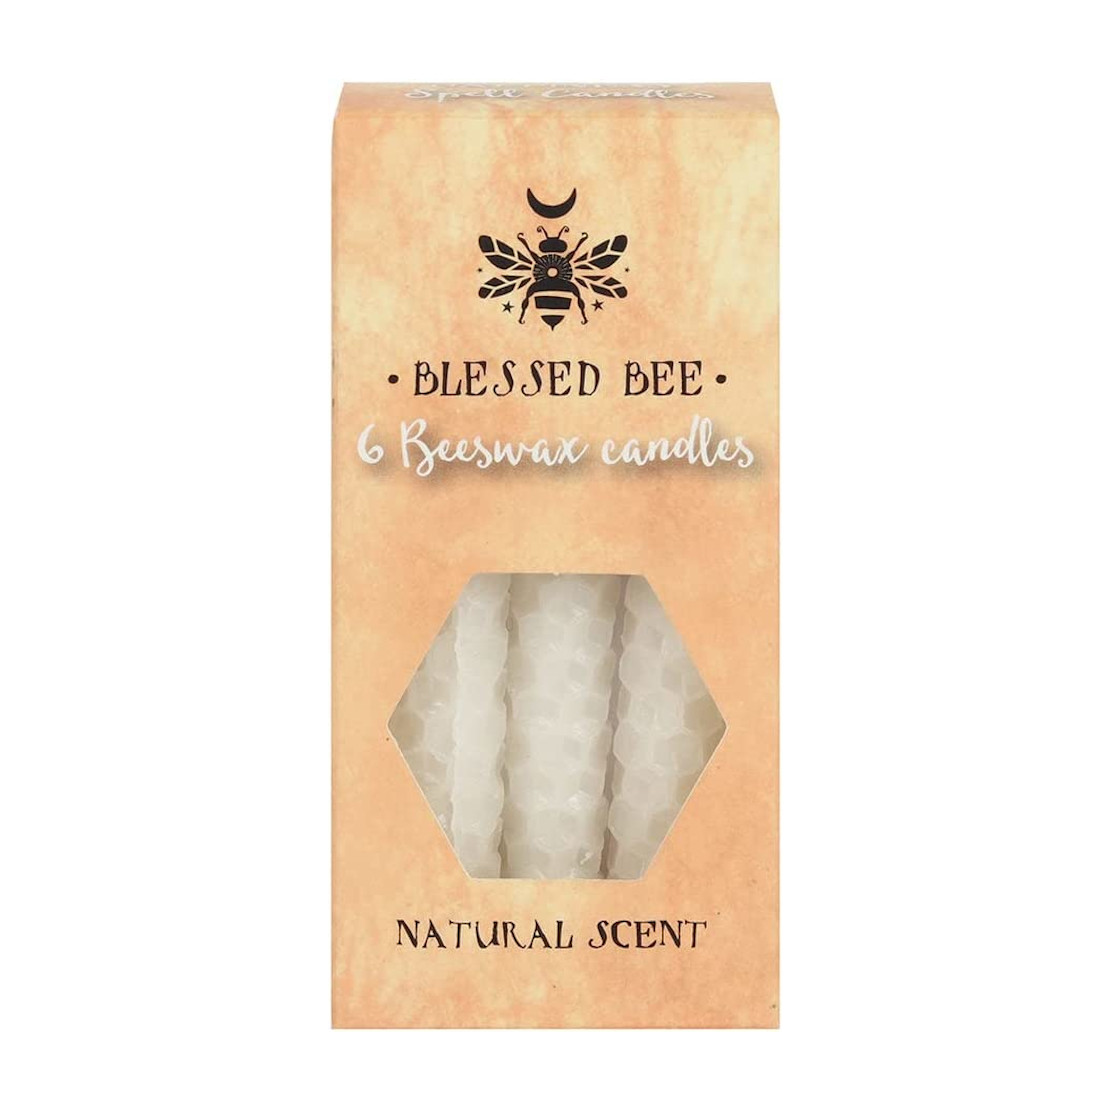 Blessed Bee White Beeswax Candles Pack of 6